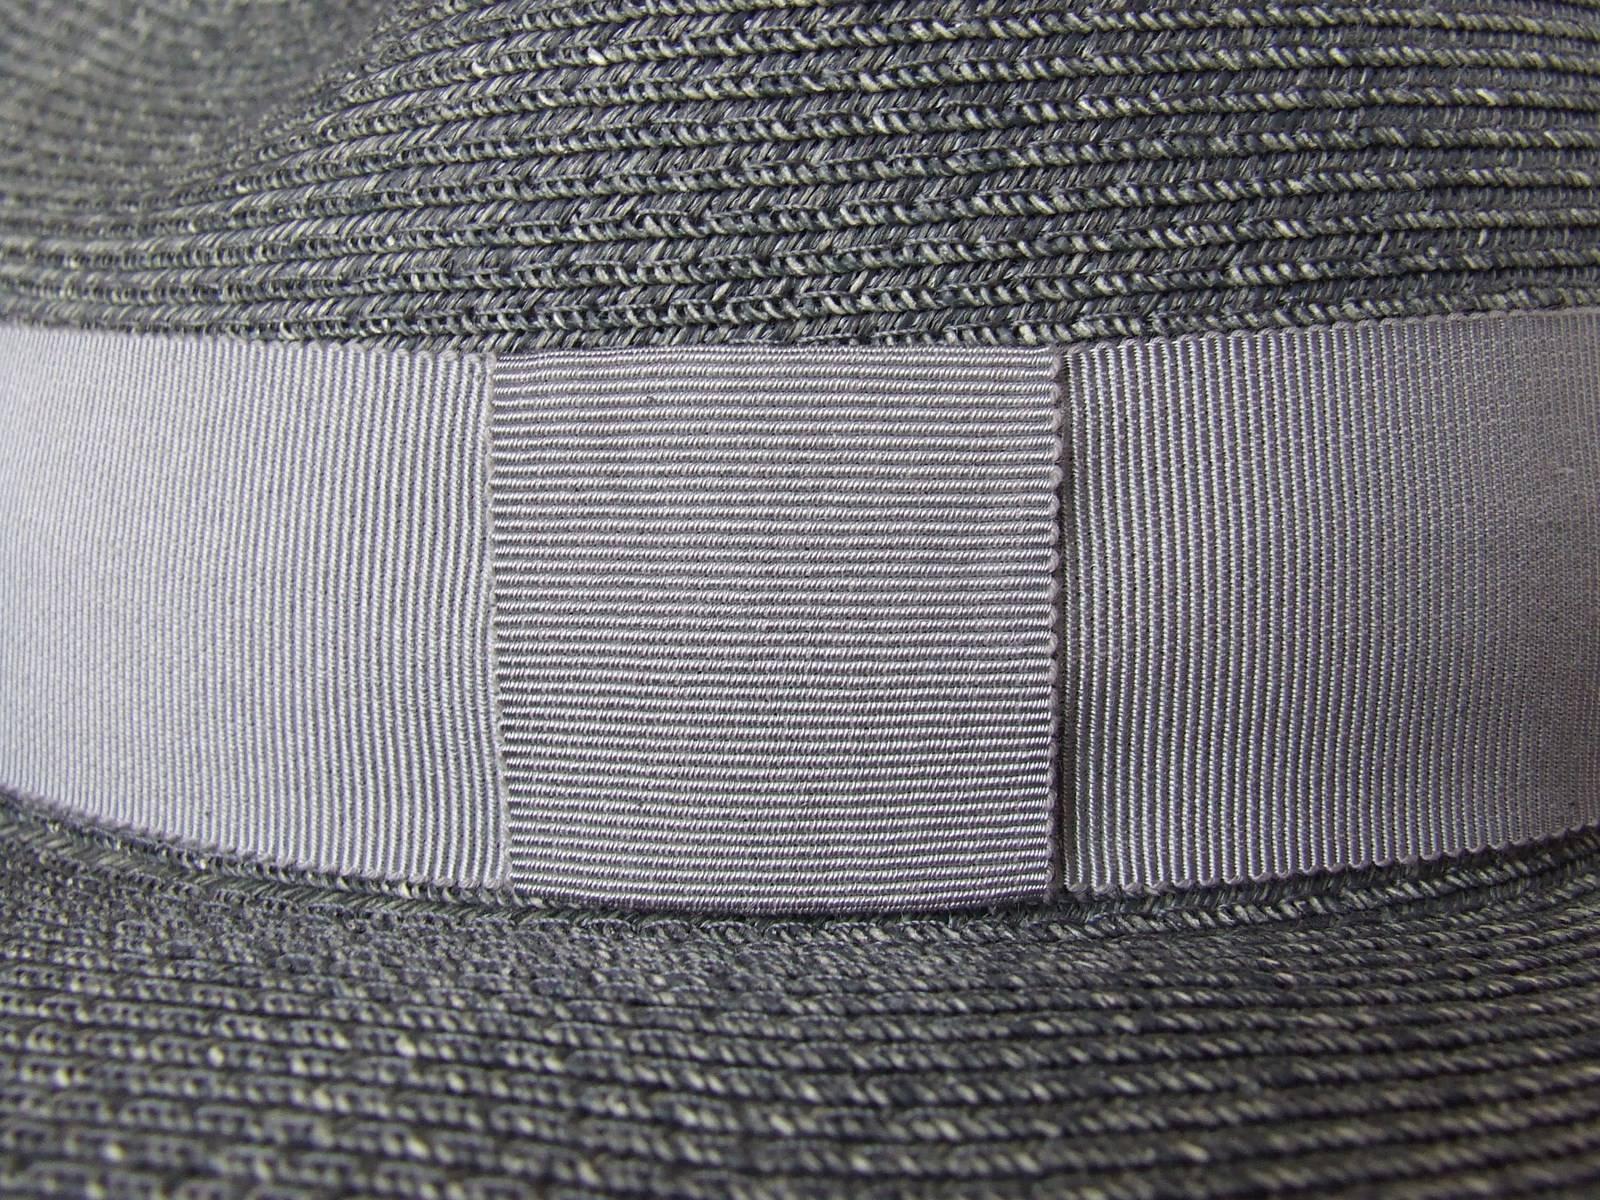 GORGEOUS AUTHENTIC HERMES HAT

Sun Hat

Made in 2015

Made in Italy

Made of 100% Paper

Colorway: heather gray

Sewn braids of paper

This hat is sublime, and ultra resisting

